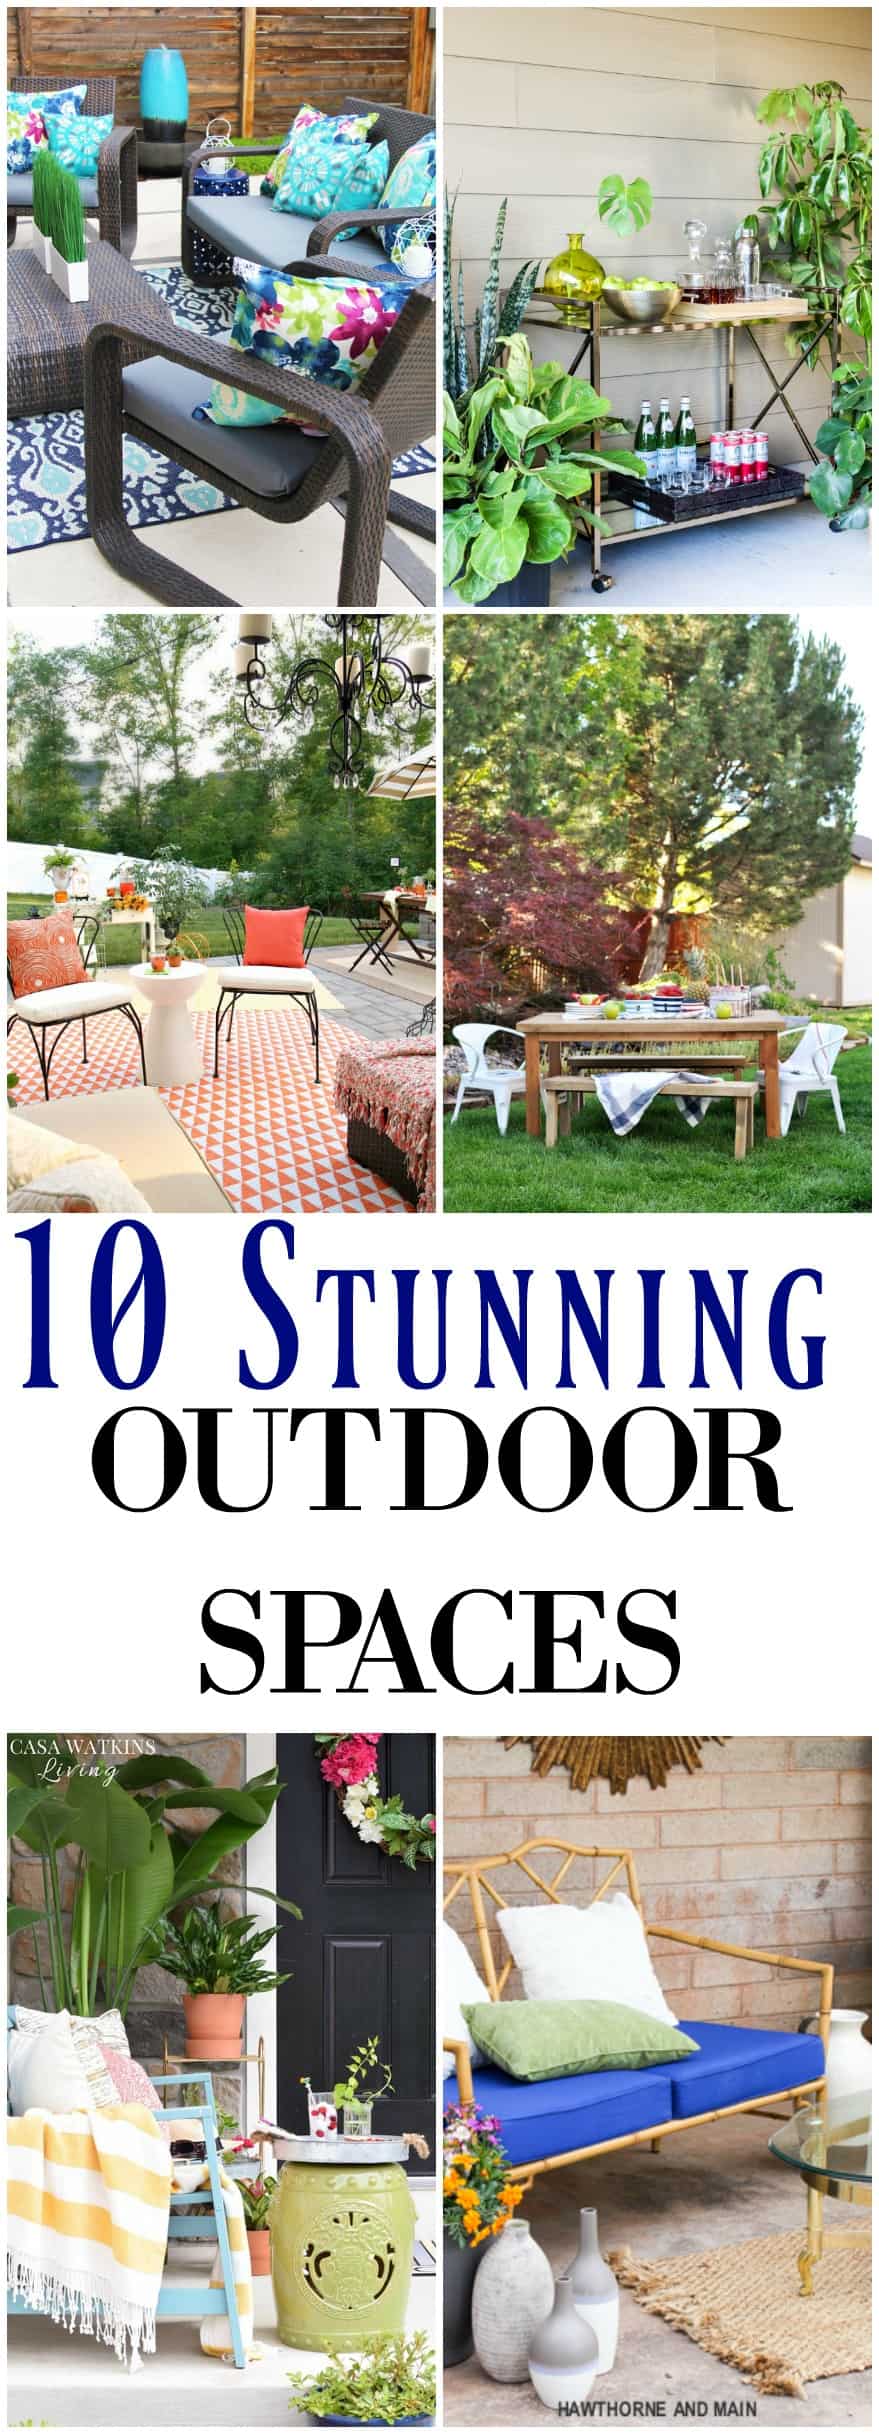 10 stunning outdoor spaces